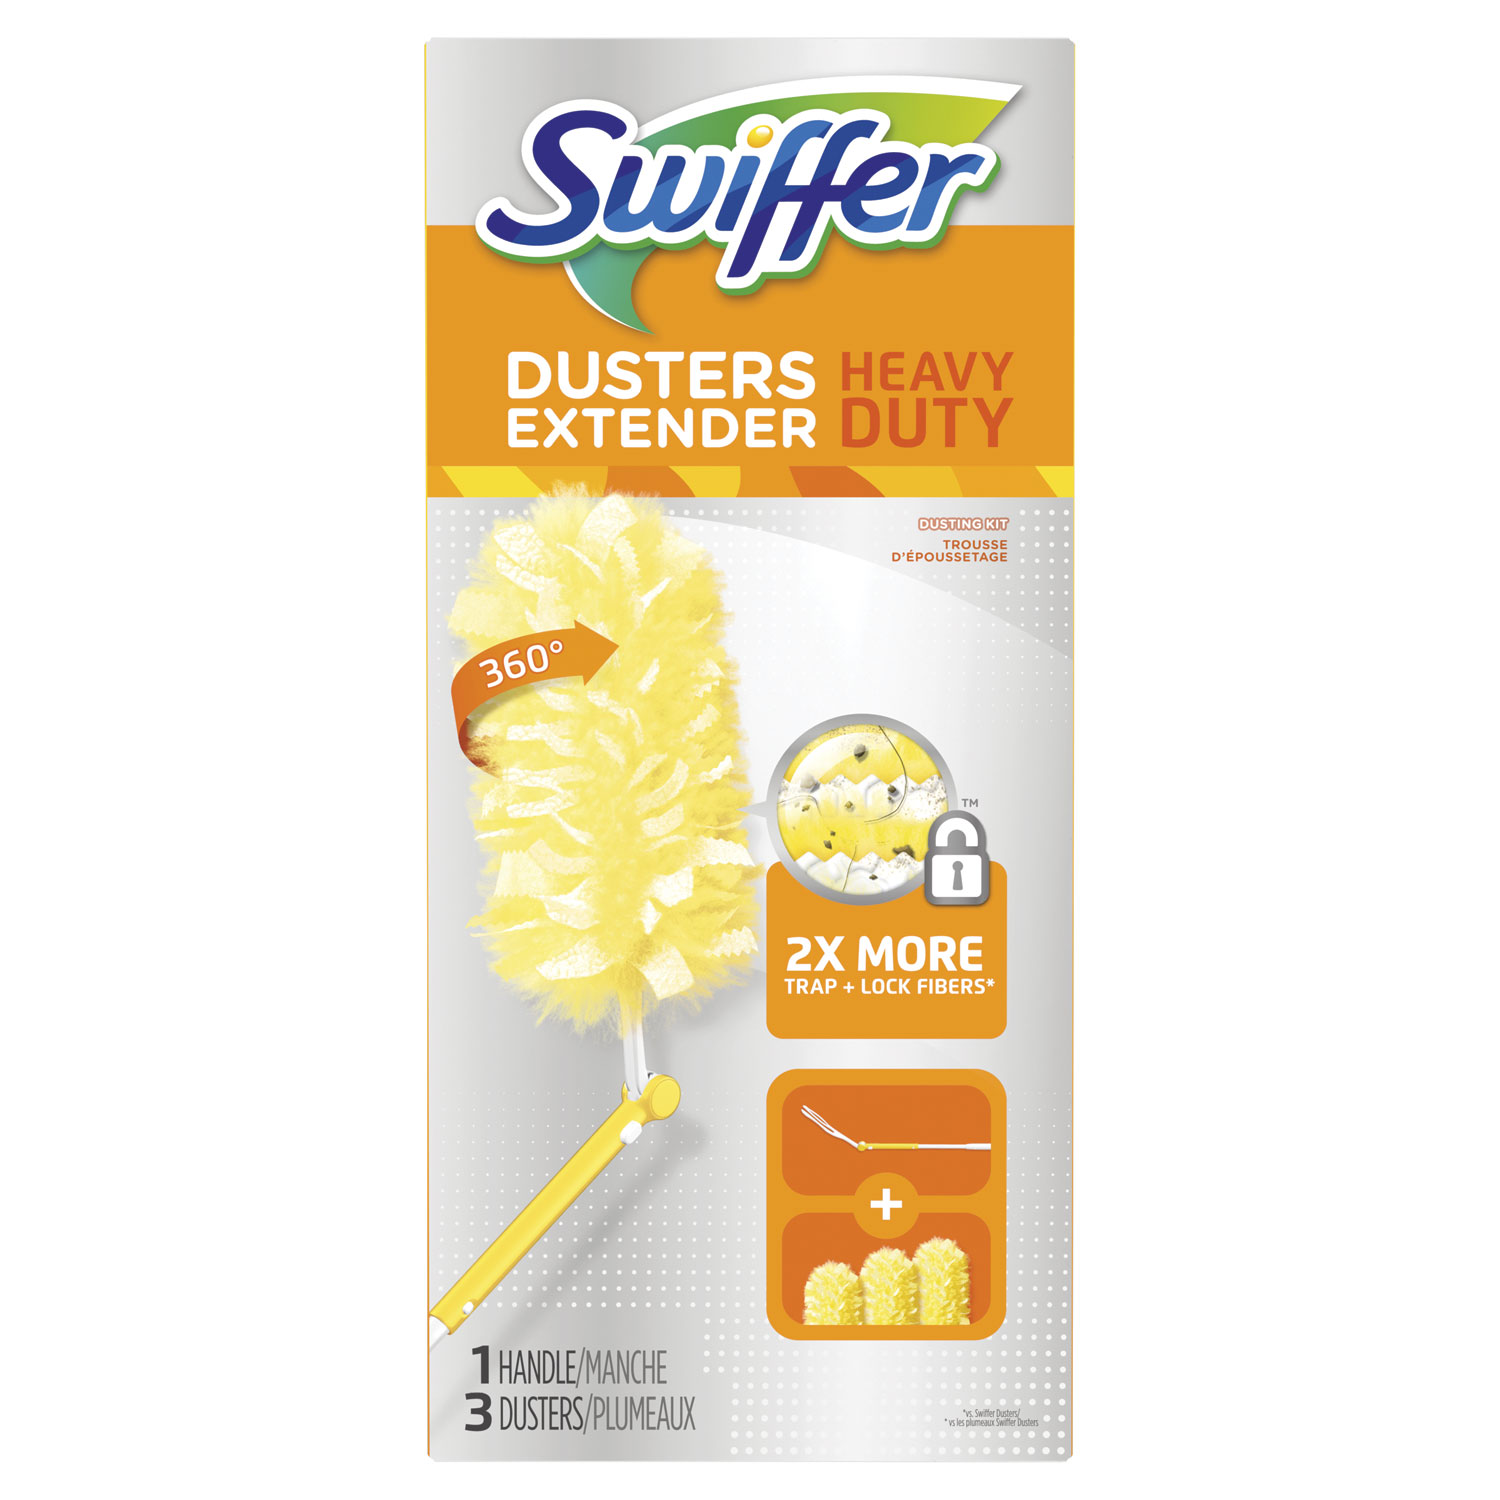 Swiffer Heavy Duty Dusters - Plastic Handle Extends to 3', 1 Handle & 3 Dusters/Kit, 6/Case